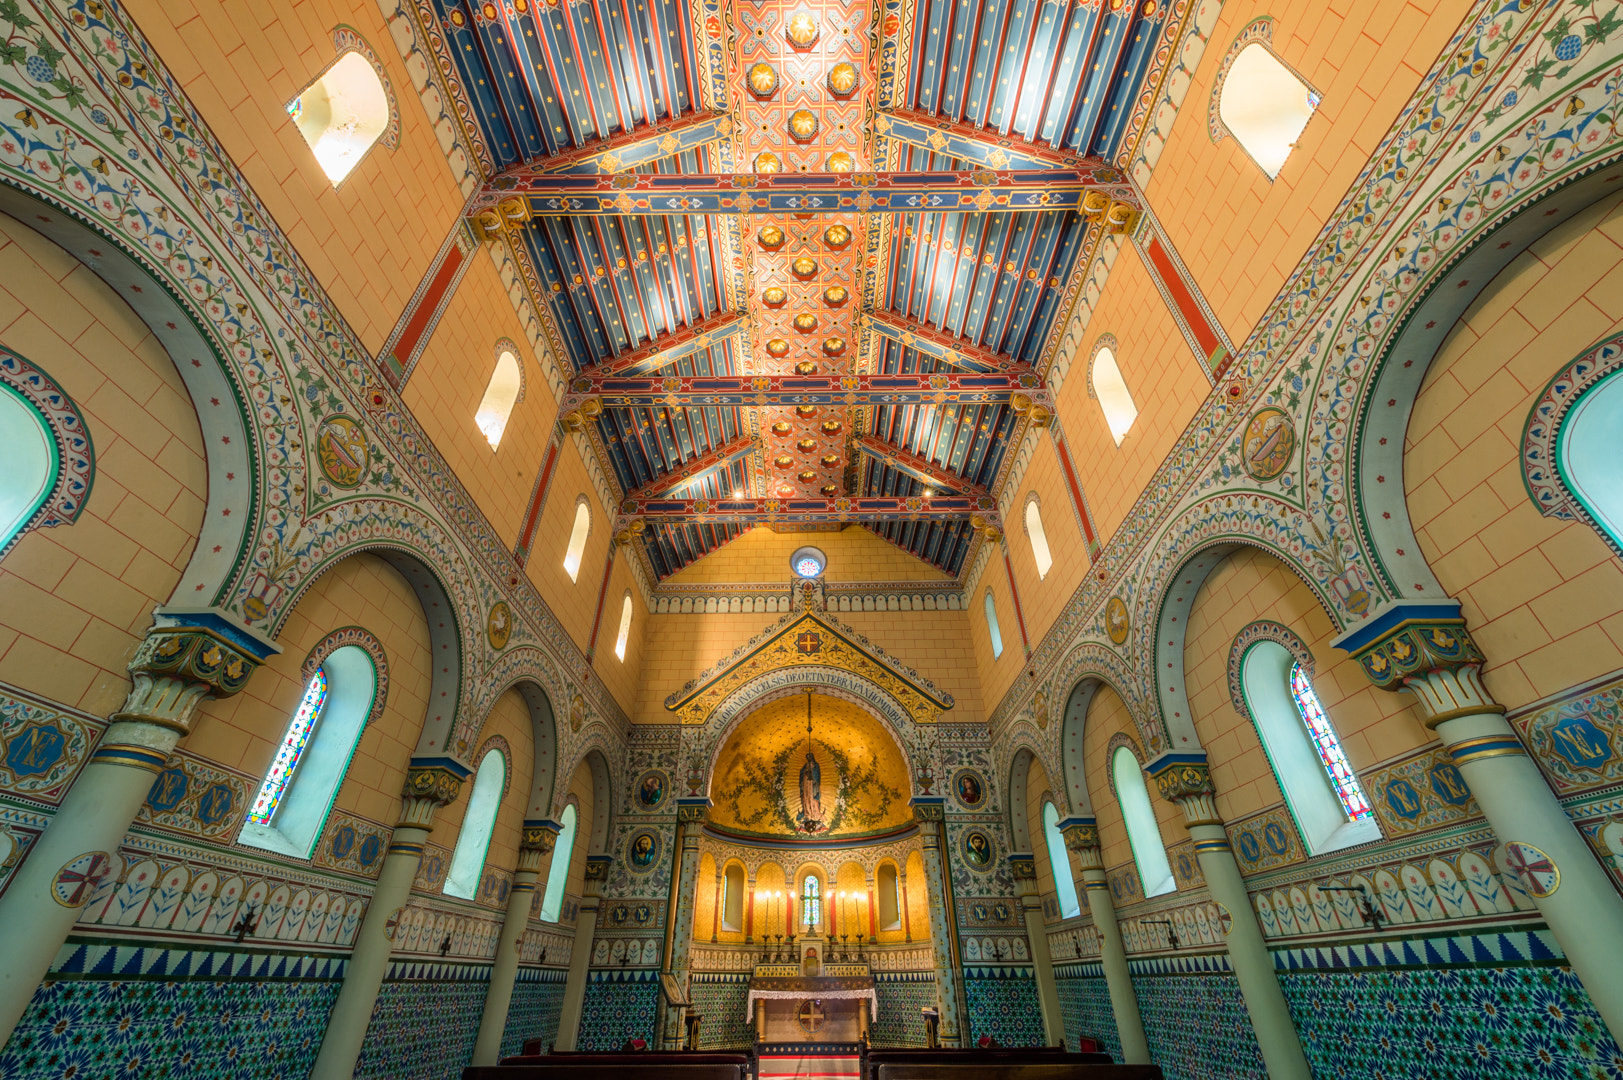 Nikon Df sample photo. Imperial chapel/biarritz/basque country photography